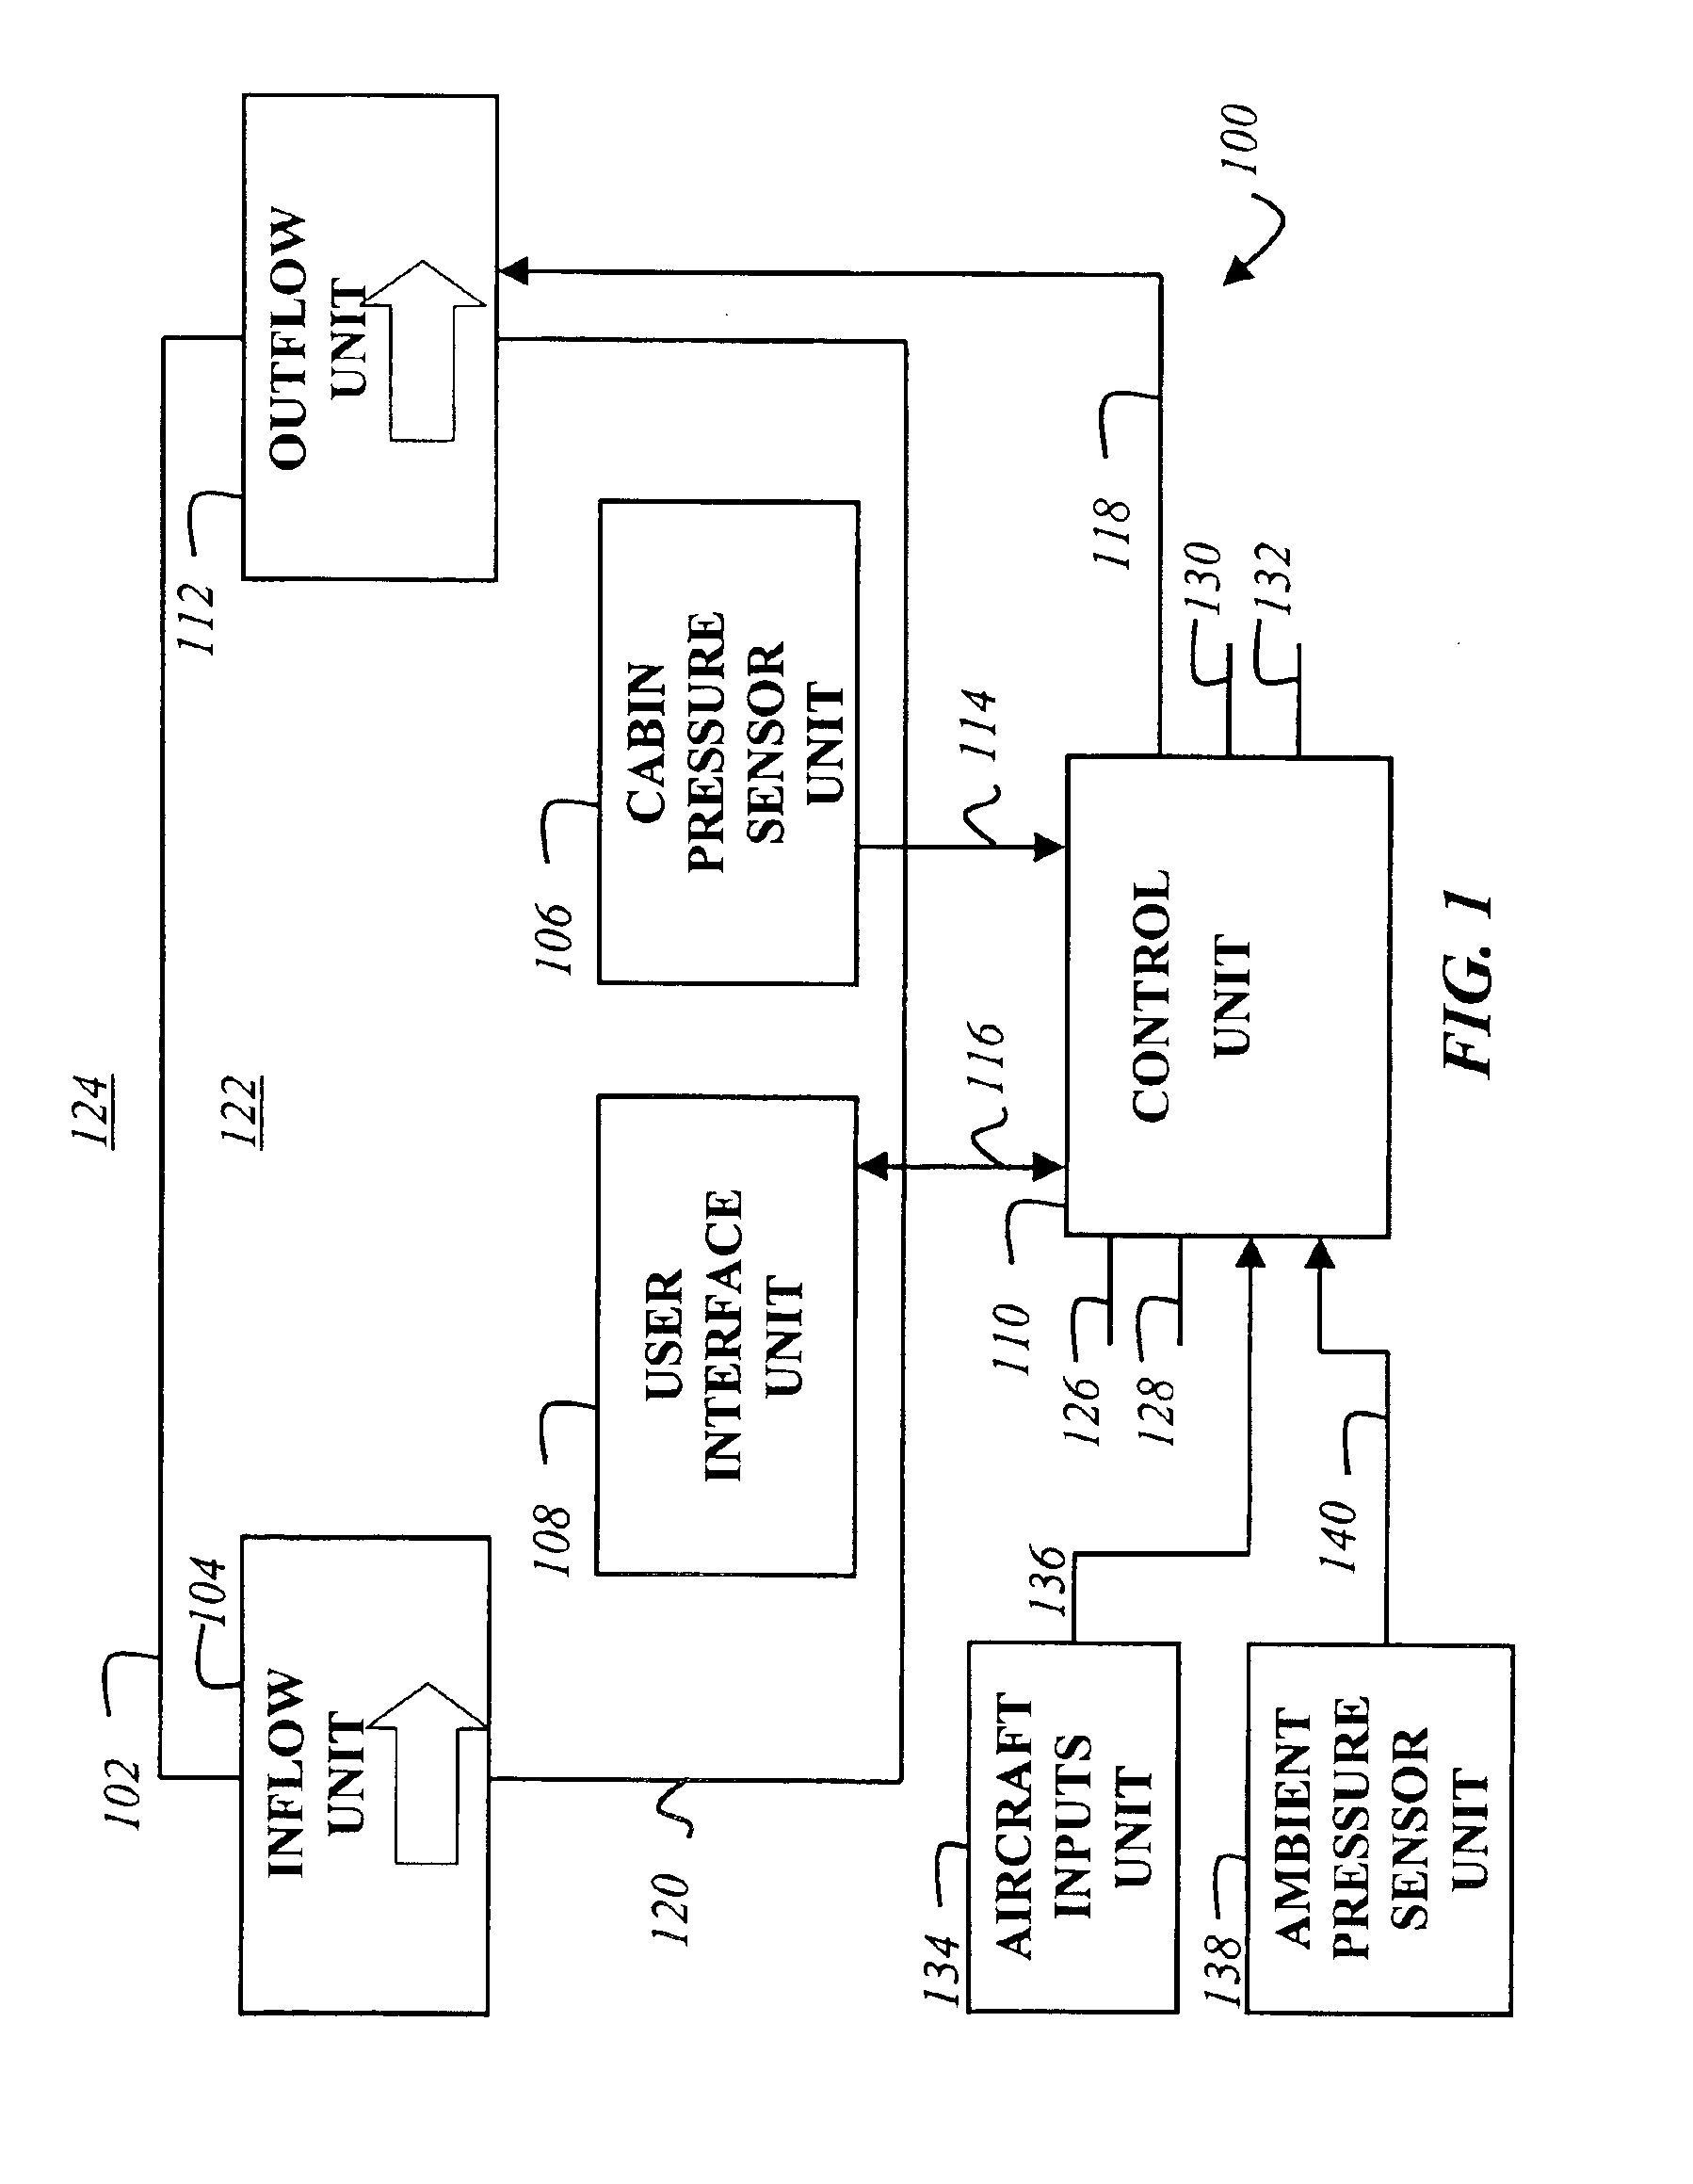 Cabin pressure control method and apparatus using all-electric control without outflow valve position feedback